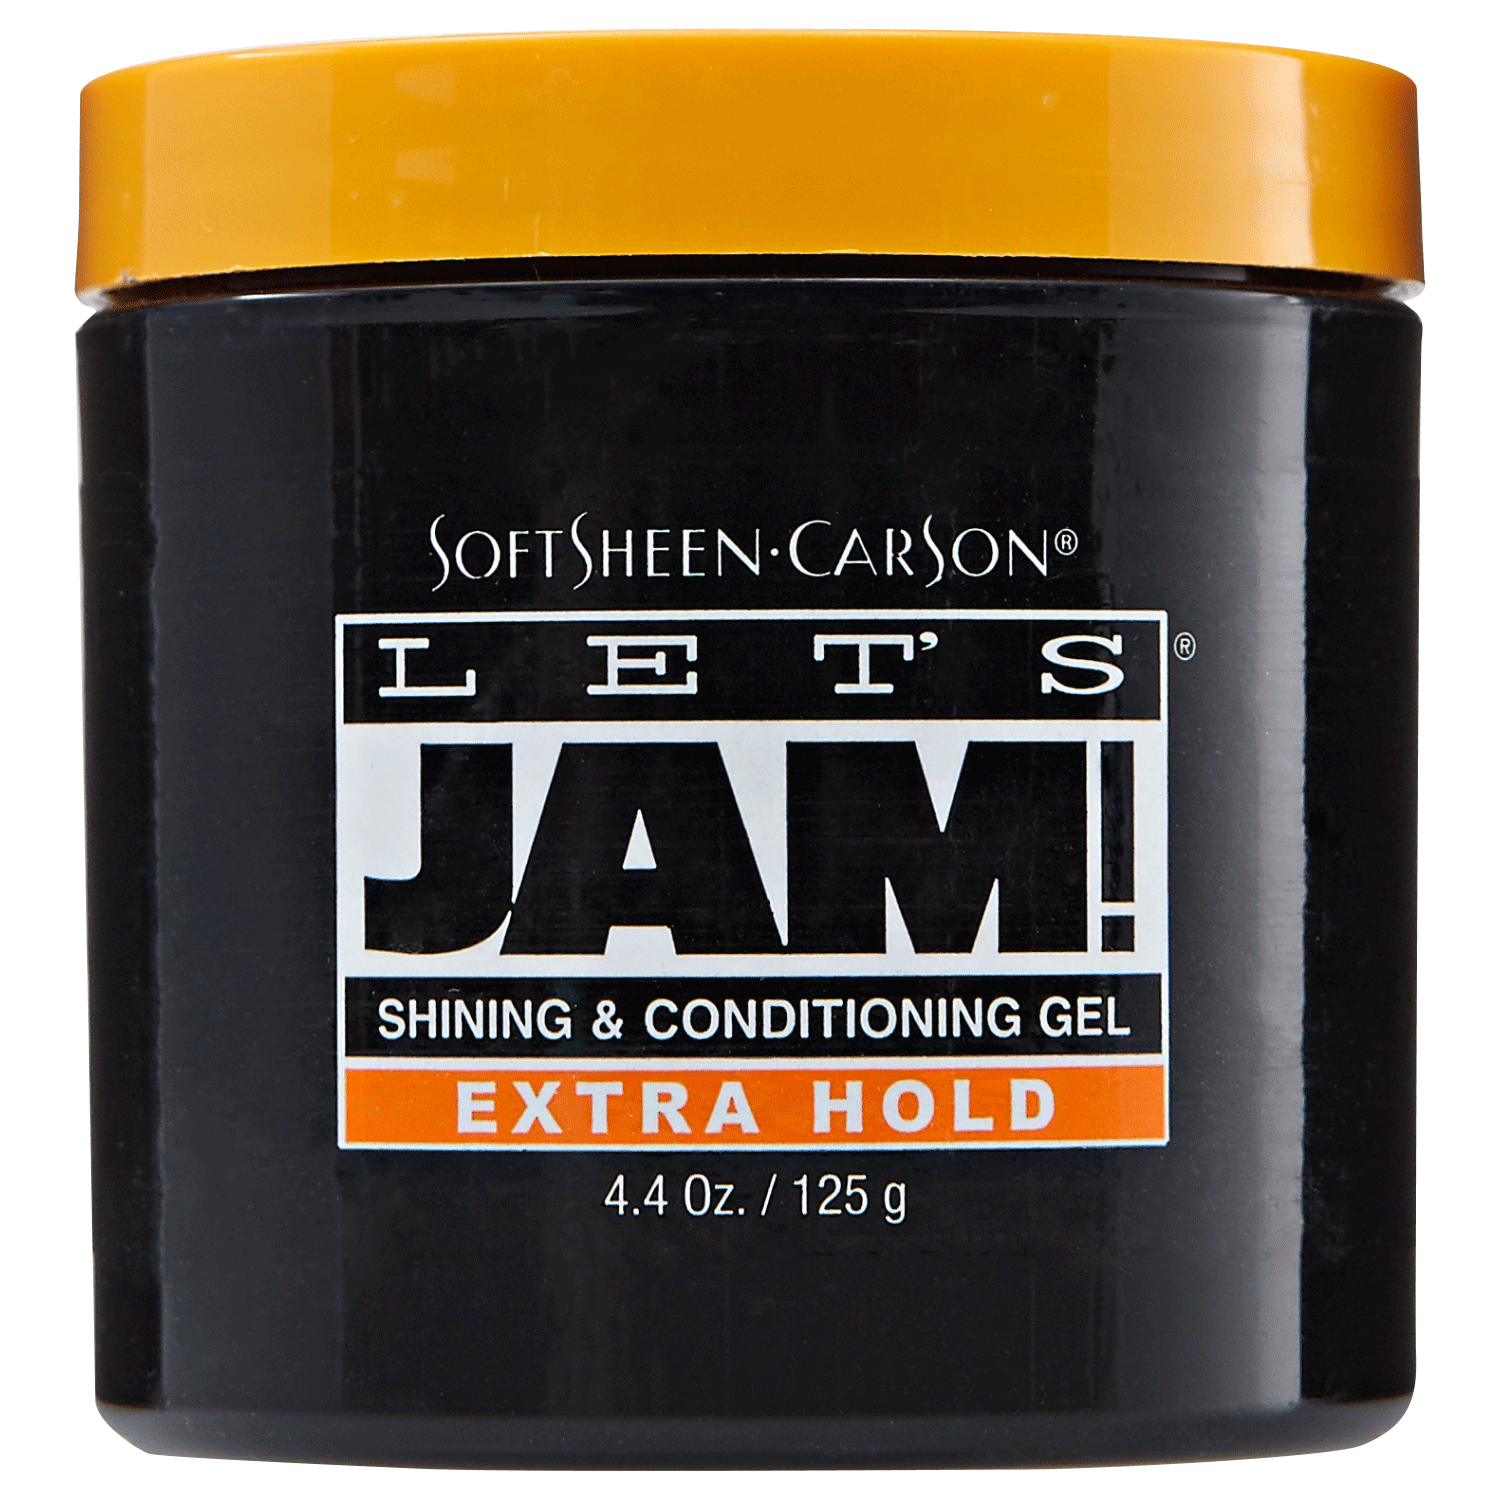 Let's Jam Shining & Conditioning Gel Extra Hold 4.4oz